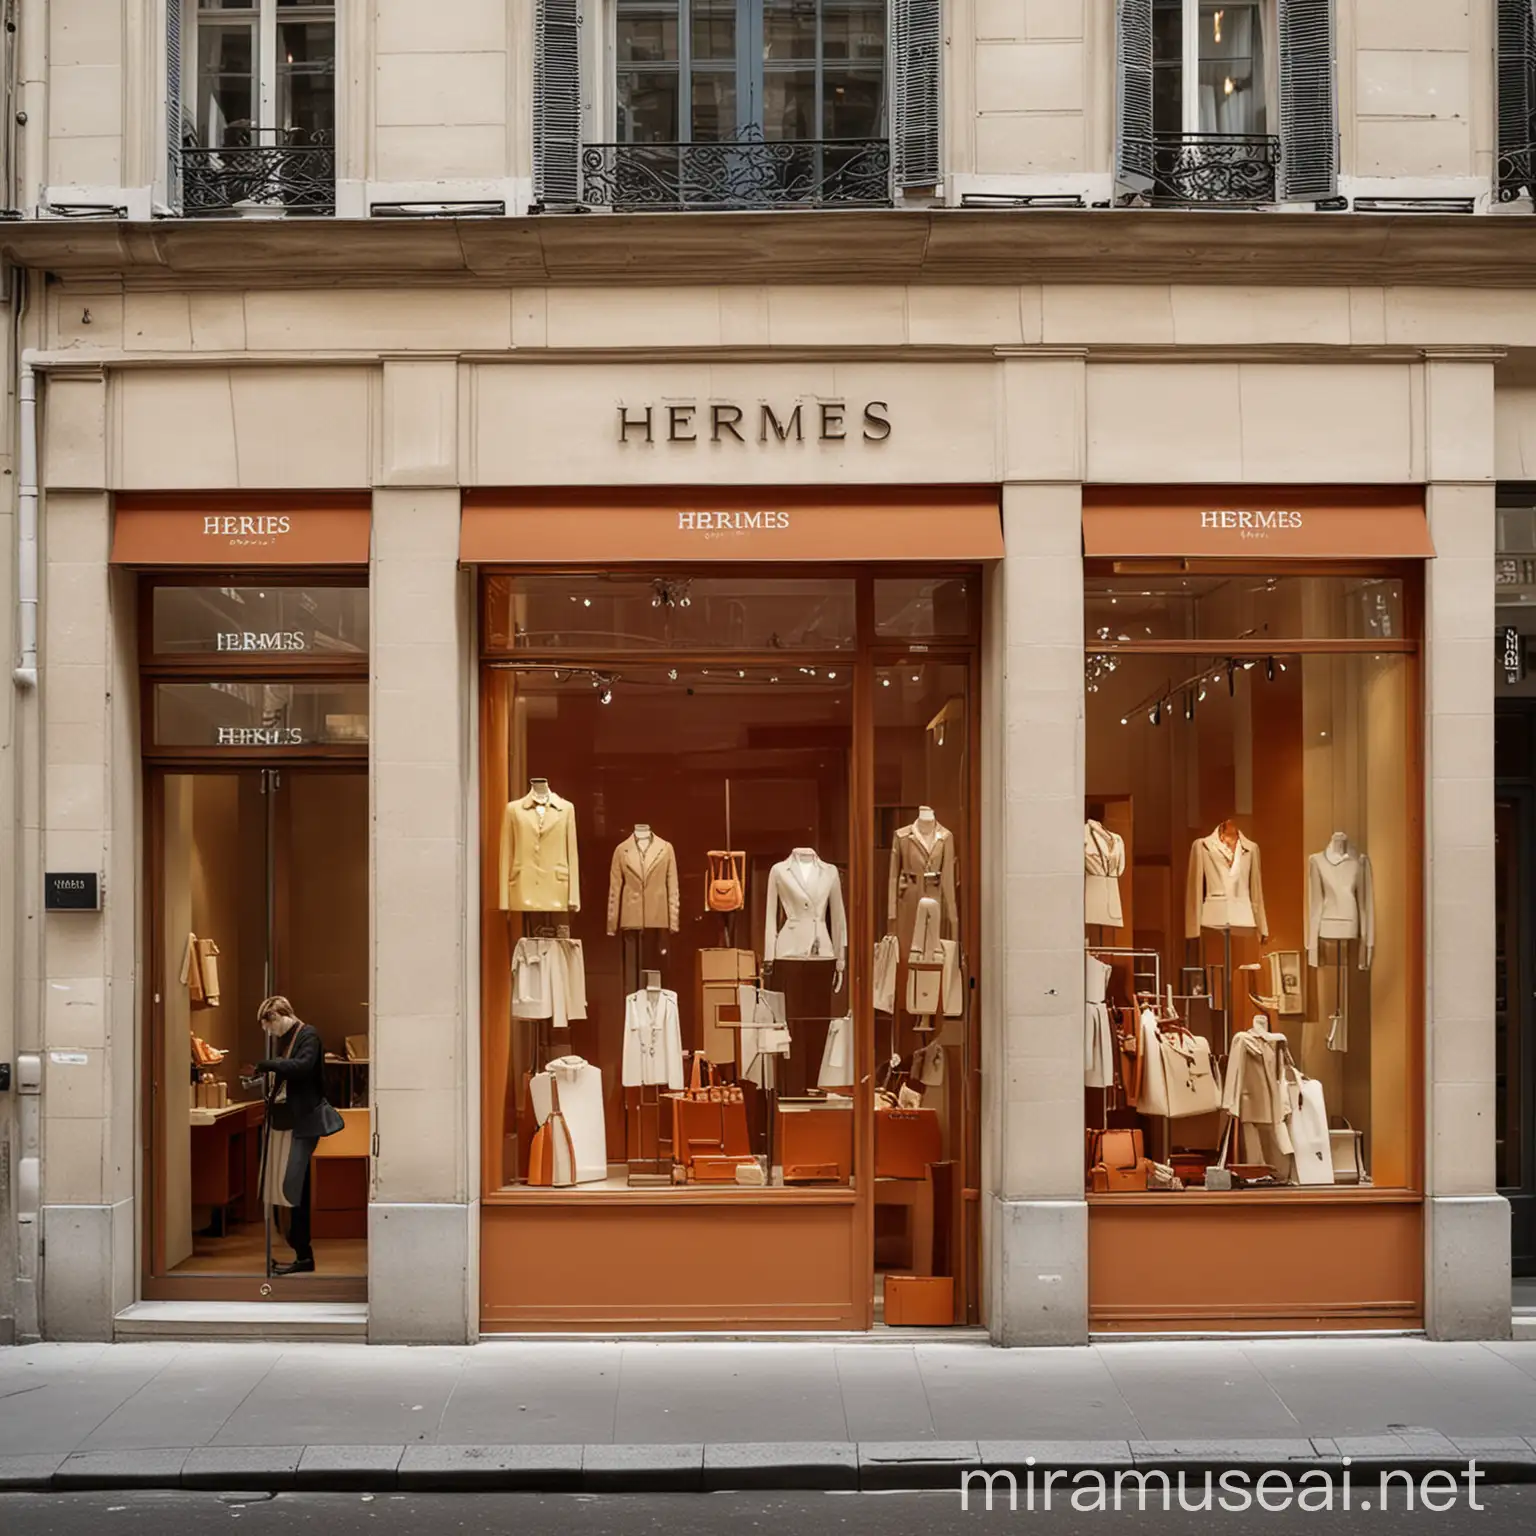 Artisanal Herms Production French Craftsmanship in Global Distribution